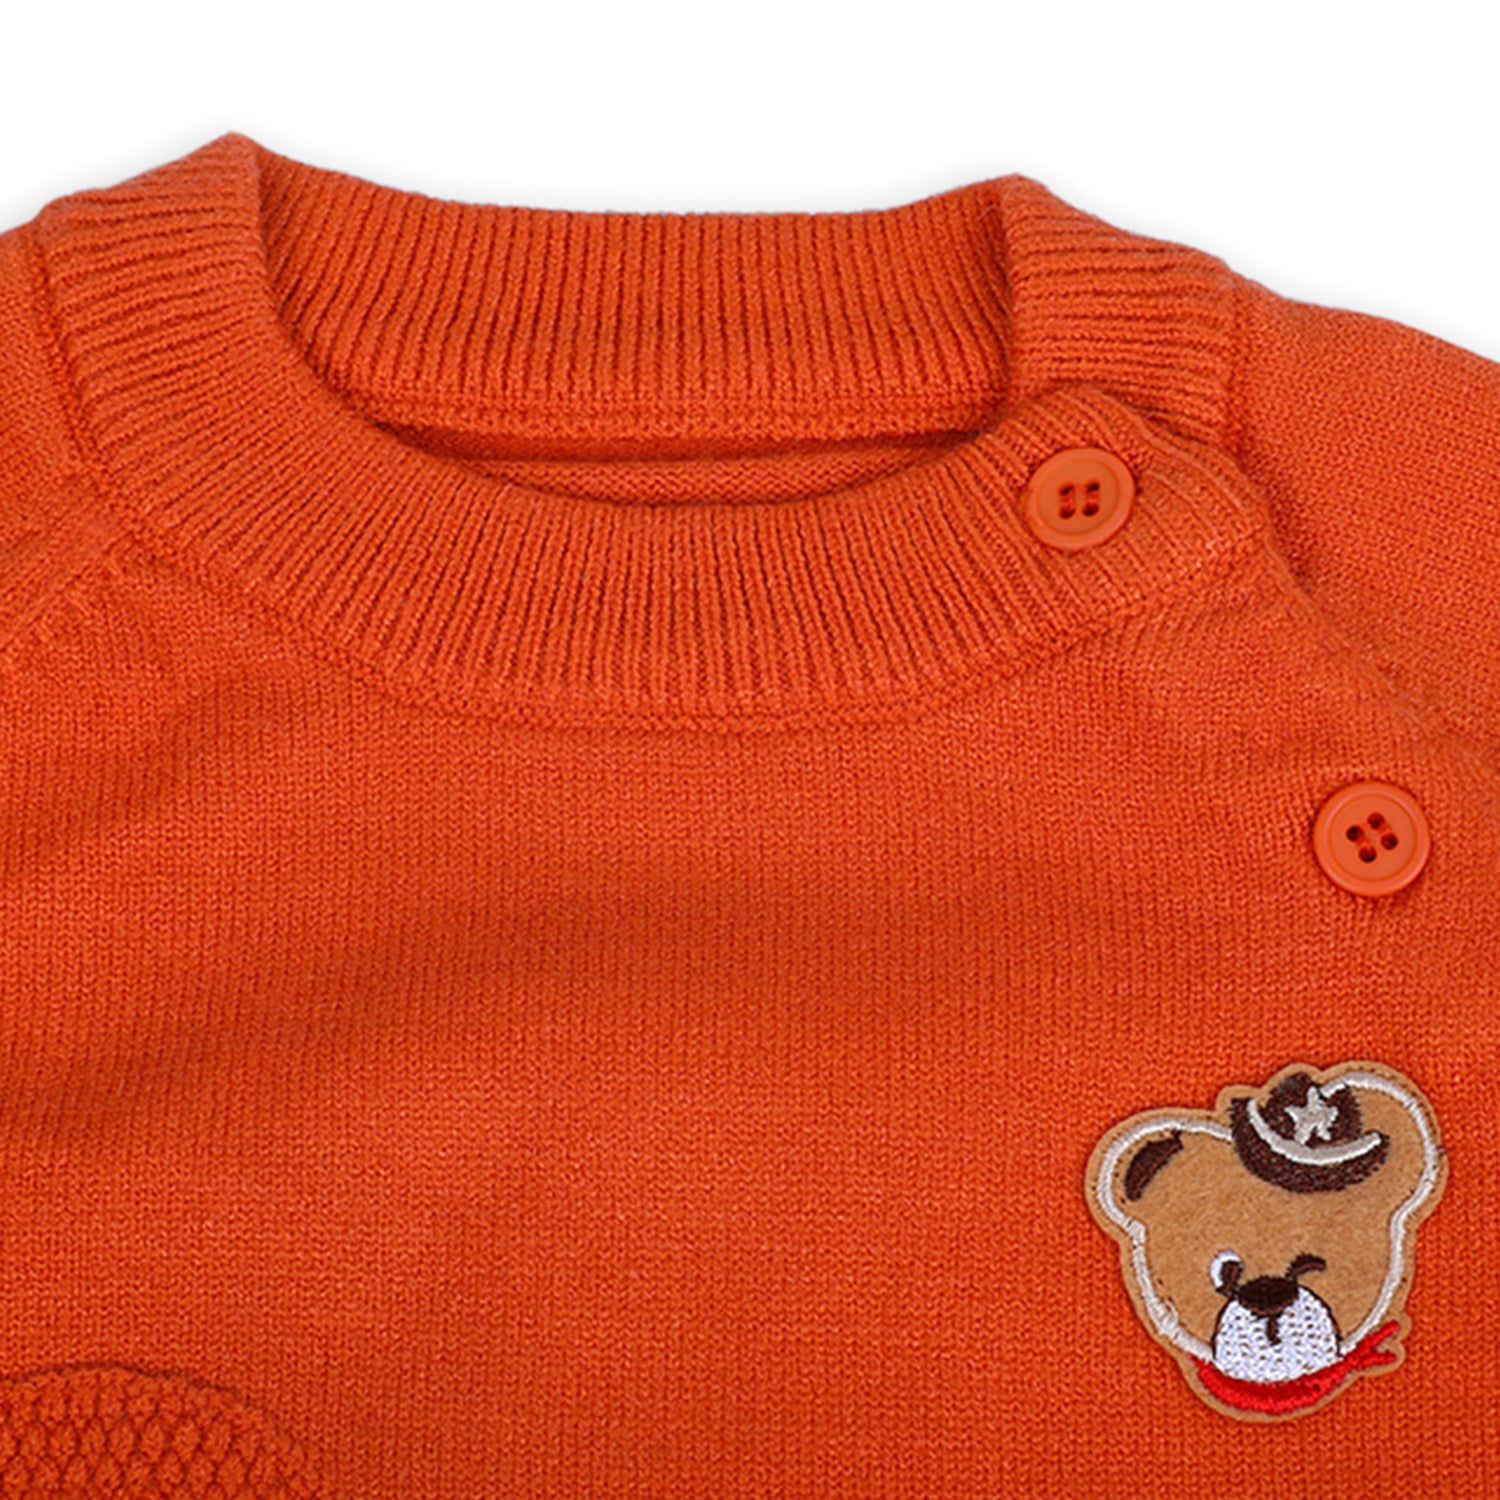 Bear Embroidery Premium Full Sleeves Knitted Sweater - Orange